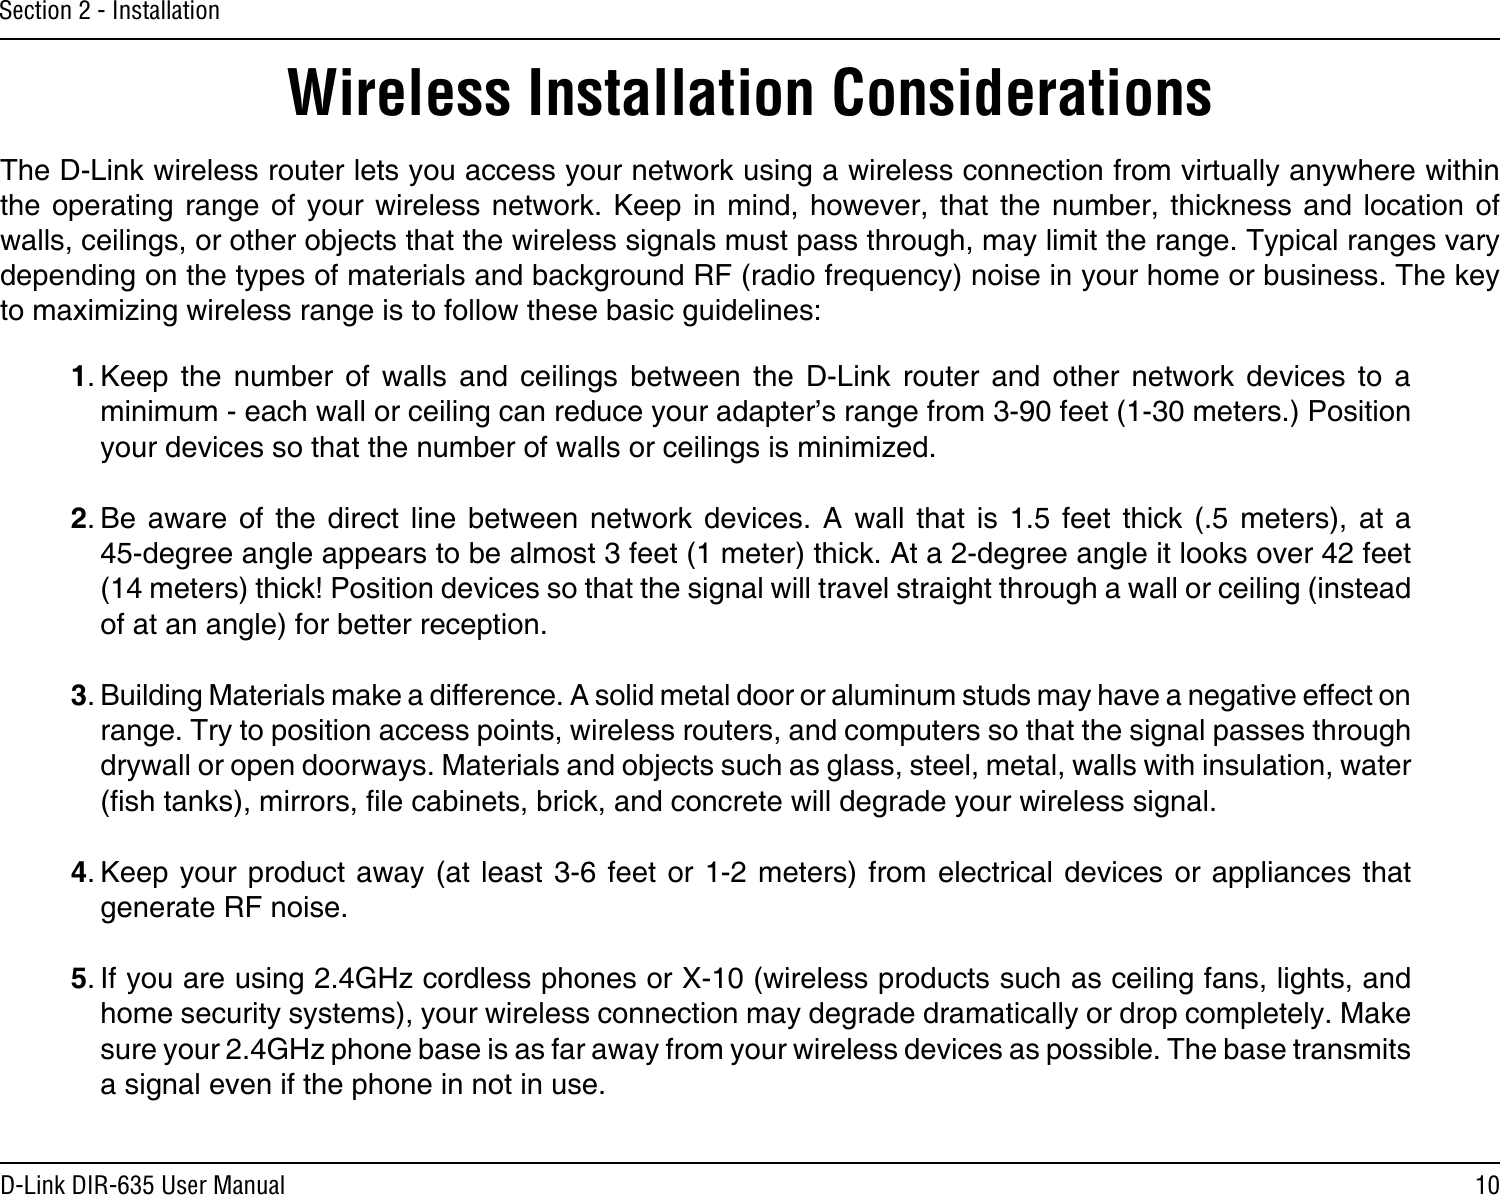 10D-Link DIR-635 User ManualSection 2 - InstallationWireless Installation ConsiderationsThe D-Link wireless router lets you access your network using a wireless connection from virtually anywhere within the operating range  of  your  wireless network. Keep  in  mind,  however, that the  number,  thickness  and location of walls, ceilings, or other objects that the wireless signals must pass through, may limit the range. Typical ranges vary depending on the types of materials and background RF (radio frequency) noise in your home or business. The key to maximizing wireless range is to follow these basic guidelines:1. Keep  the  number  of  walls  and  ceilings  between  the  D-Link  router  and  other  network  devices  to  a minimum - each wall or ceiling can reduce your adapter’s range from 3-90 feet (1-30 meters.) Position your devices so that the number of walls or ceilings is minimized.2. Be aware  of  the  direct  line  between  network  devices.  A  wall  that  is  1.5  feet  thick  (.5  meters),  at  a   45-degree angle appears to be almost 3 feet (1 meter) thick. At a 2-degree angle it looks over 42 feet (14 meters) thick! Position devices so that the signal will travel straight through a wall or ceiling (instead of at an angle) for better reception.3. Building Materials make a difference. A solid metal door or aluminum studs may have a negative effect on range. Try to position access points, wireless routers, and computers so that the signal passes through drywall or open doorways. Materials and objects such as glass, steel, metal, walls with insulation, water (sh tanks), mirrors, le cabinets, brick, and concrete will degrade your wireless signal.4. Keep your product  away (at least 3-6 feet  or 1-2  meters) from electrical  devices or appliances that generate RF noise.5. If you are using 2.4GHz cordless phones or X-10 (wireless products such as ceiling fans, lights, and home security systems), your wireless connection may degrade dramatically or drop completely. Make sure your 2.4GHz phone base is as far away from your wireless devices as possible. The base transmits a signal even if the phone in not in use.